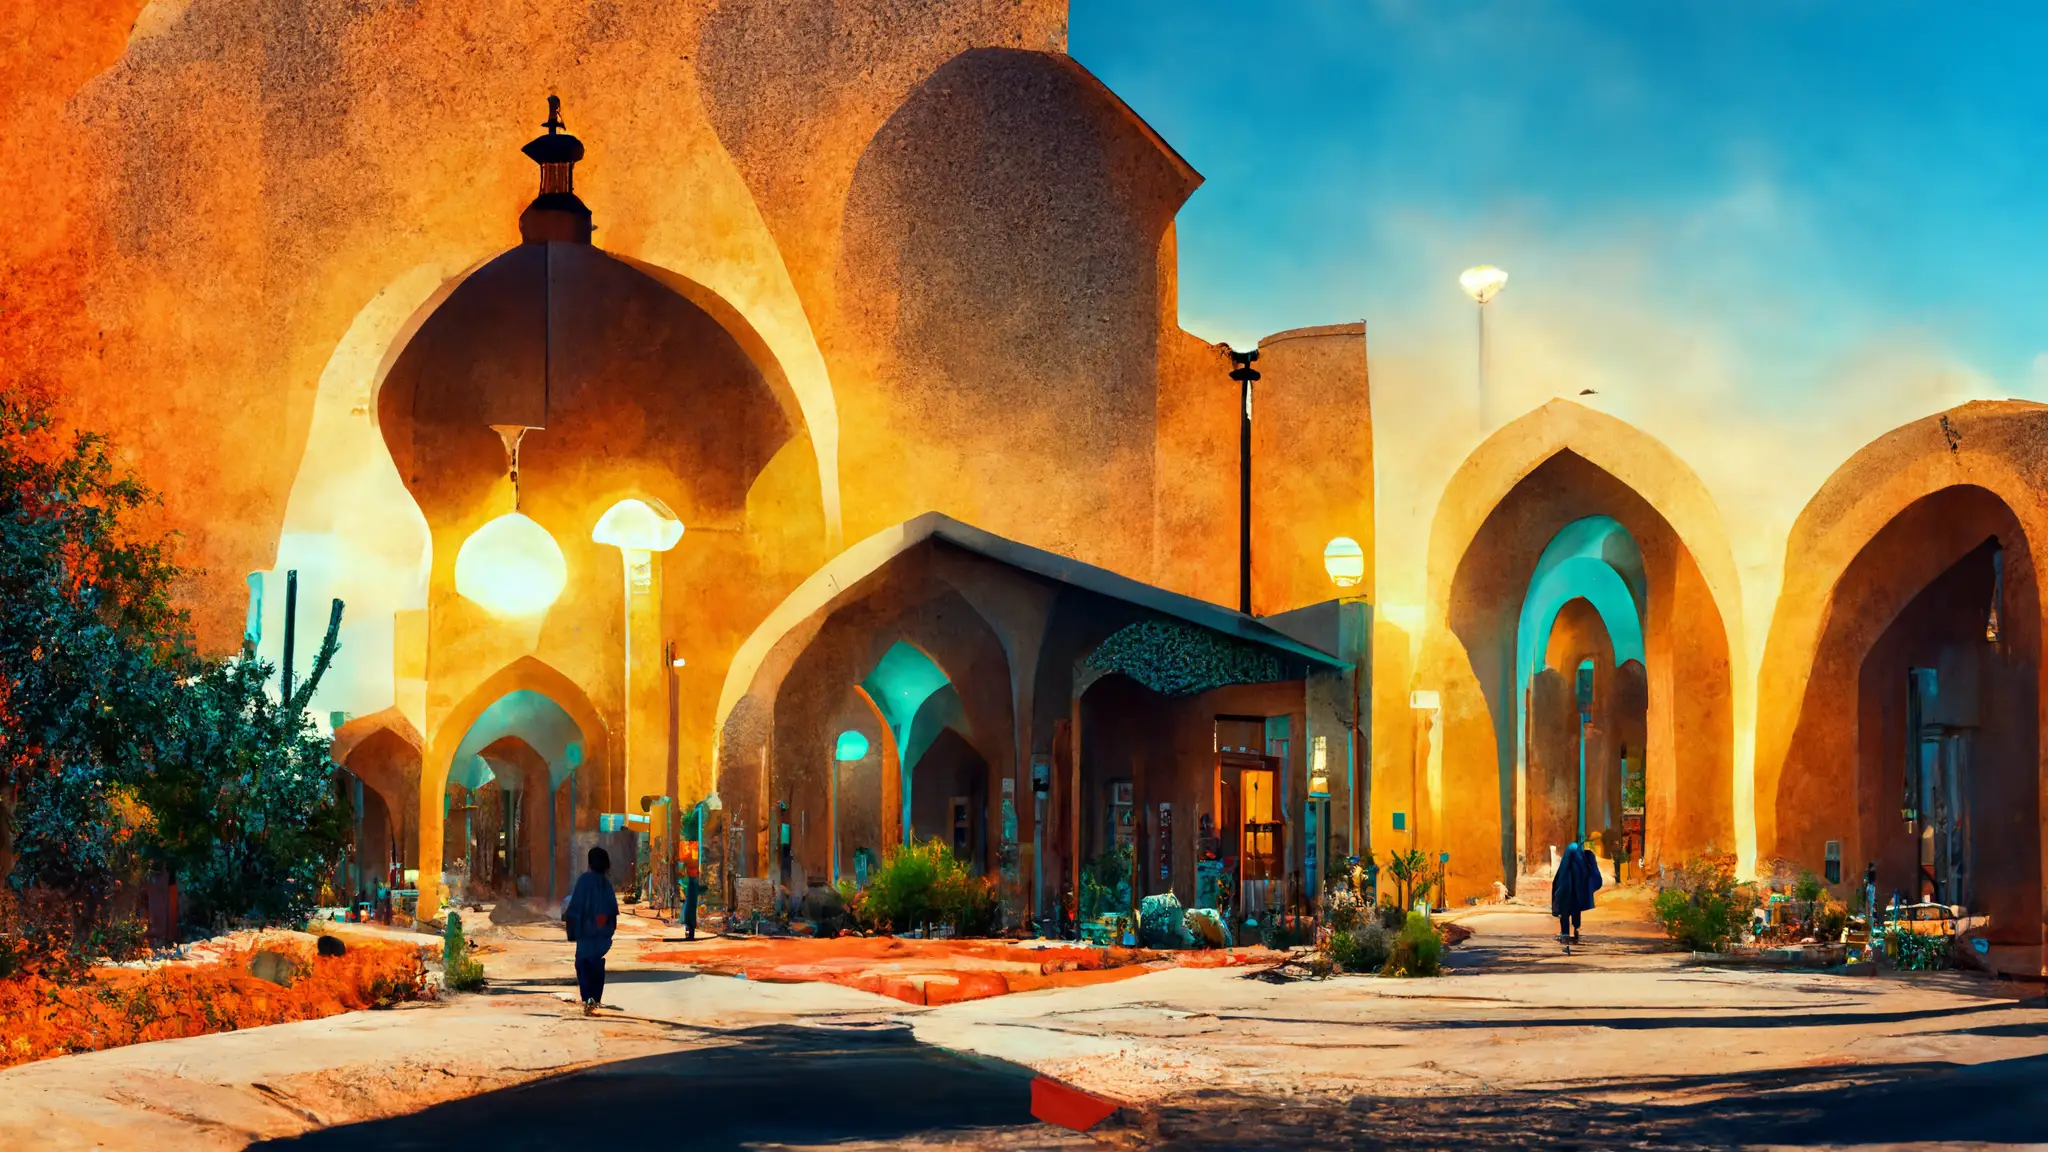 A Beautiful Street With Lamps In Front Of A Desert Mosque, 8K HDR